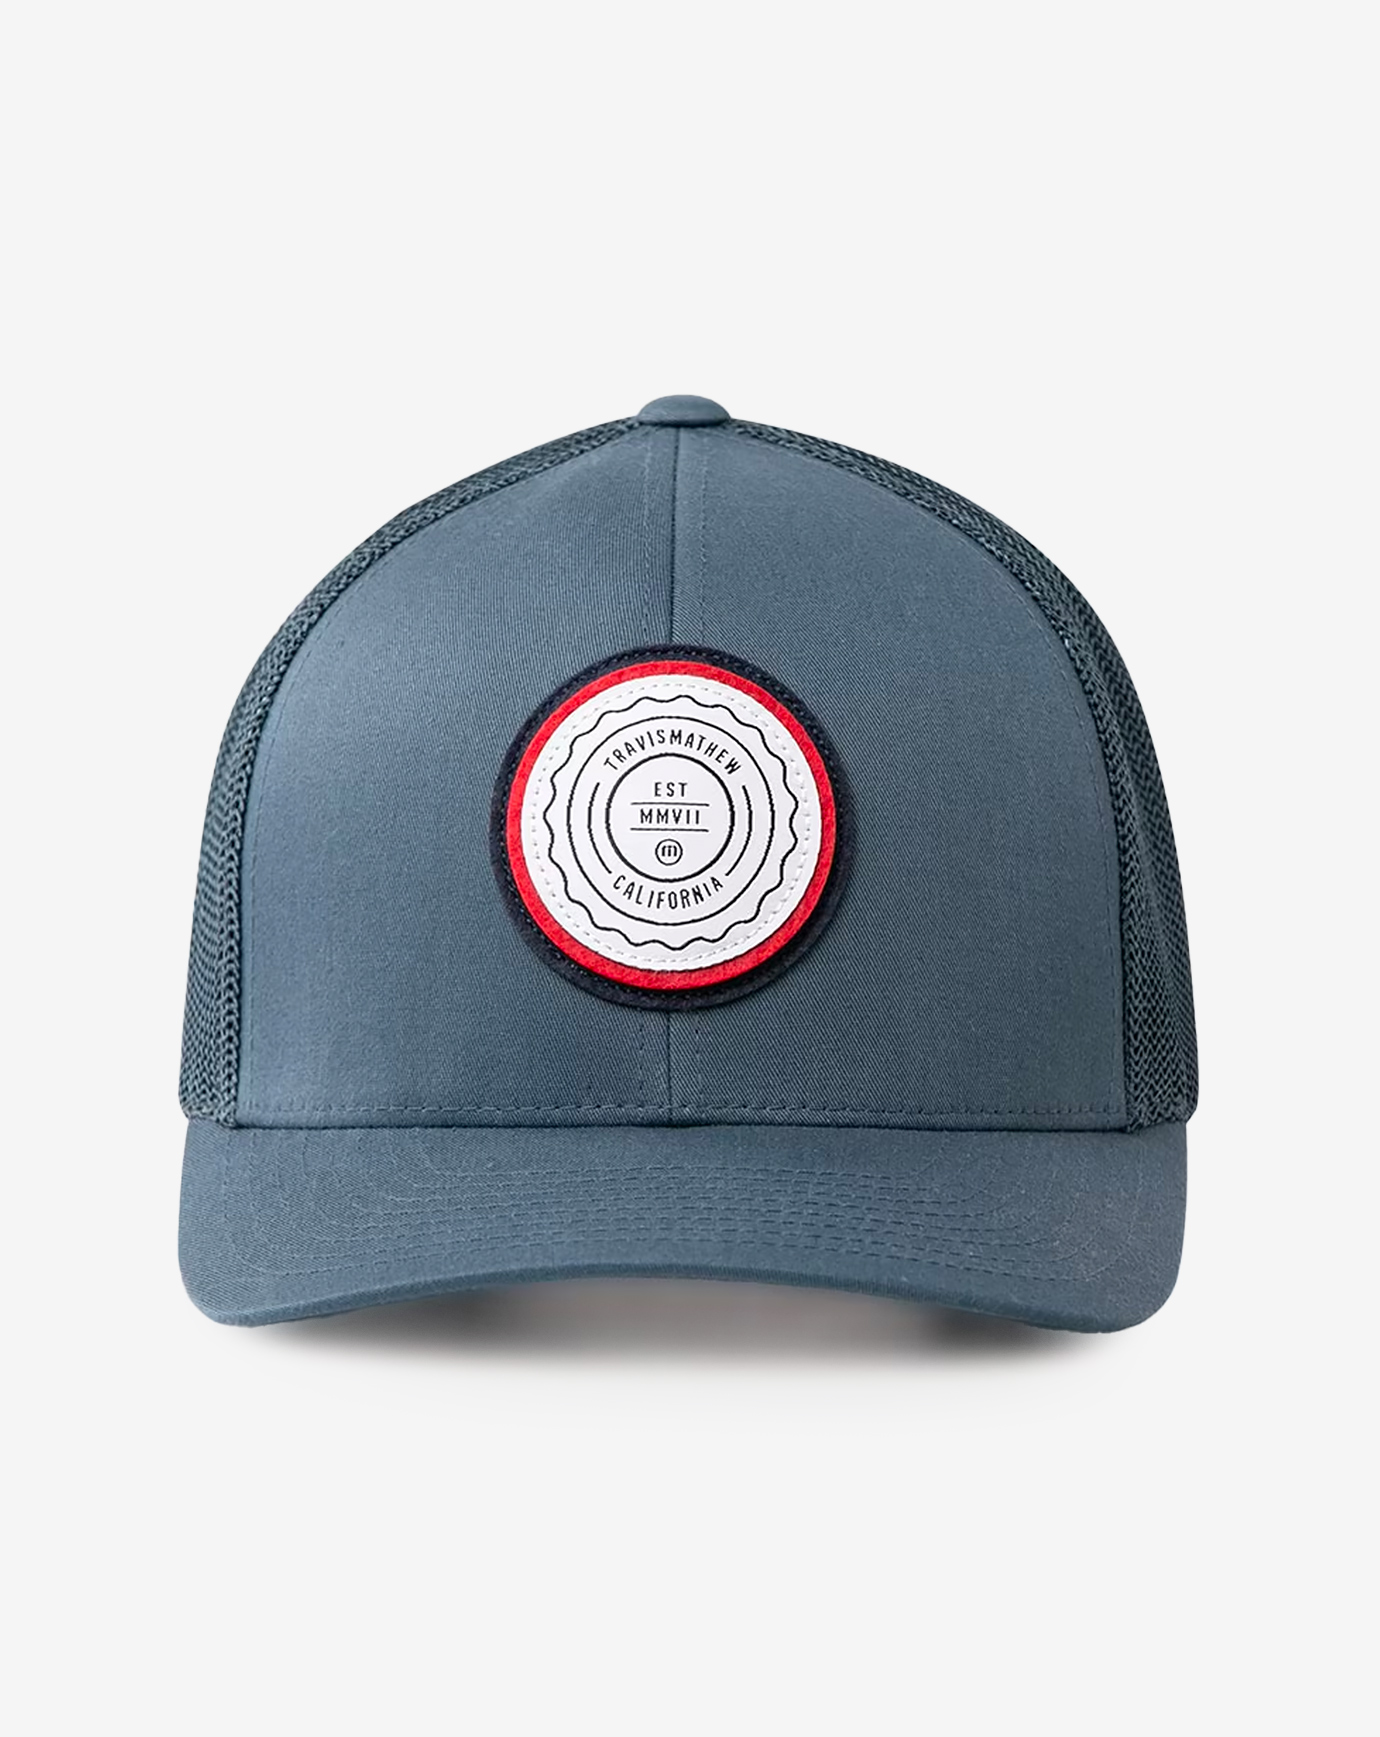 THE PATCH SNAPBACK HAT 1